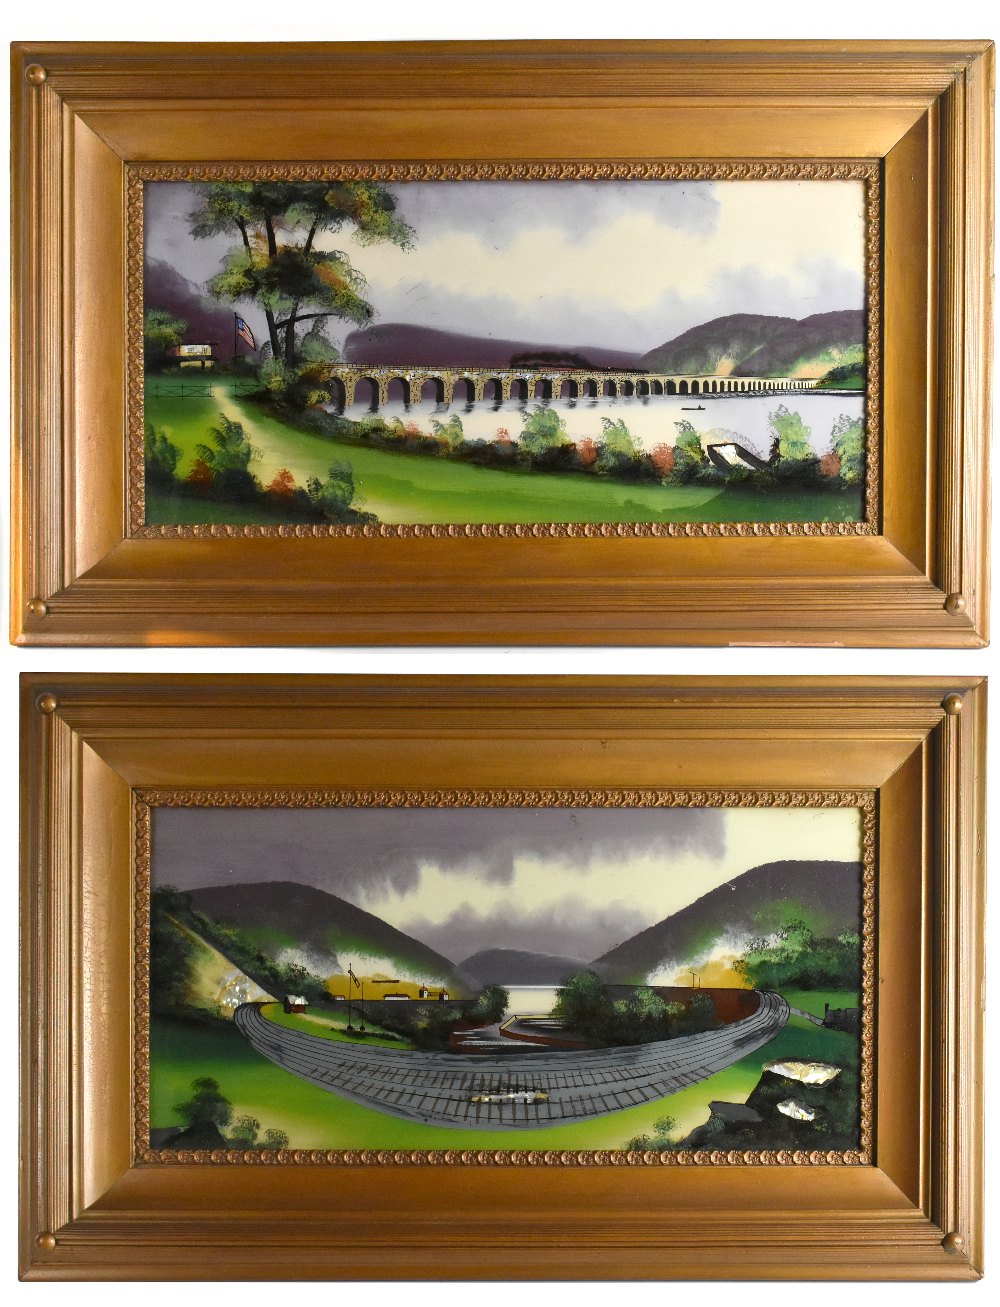 An interesting and rare pair of American 19th century reverse paintings on glass depicting the